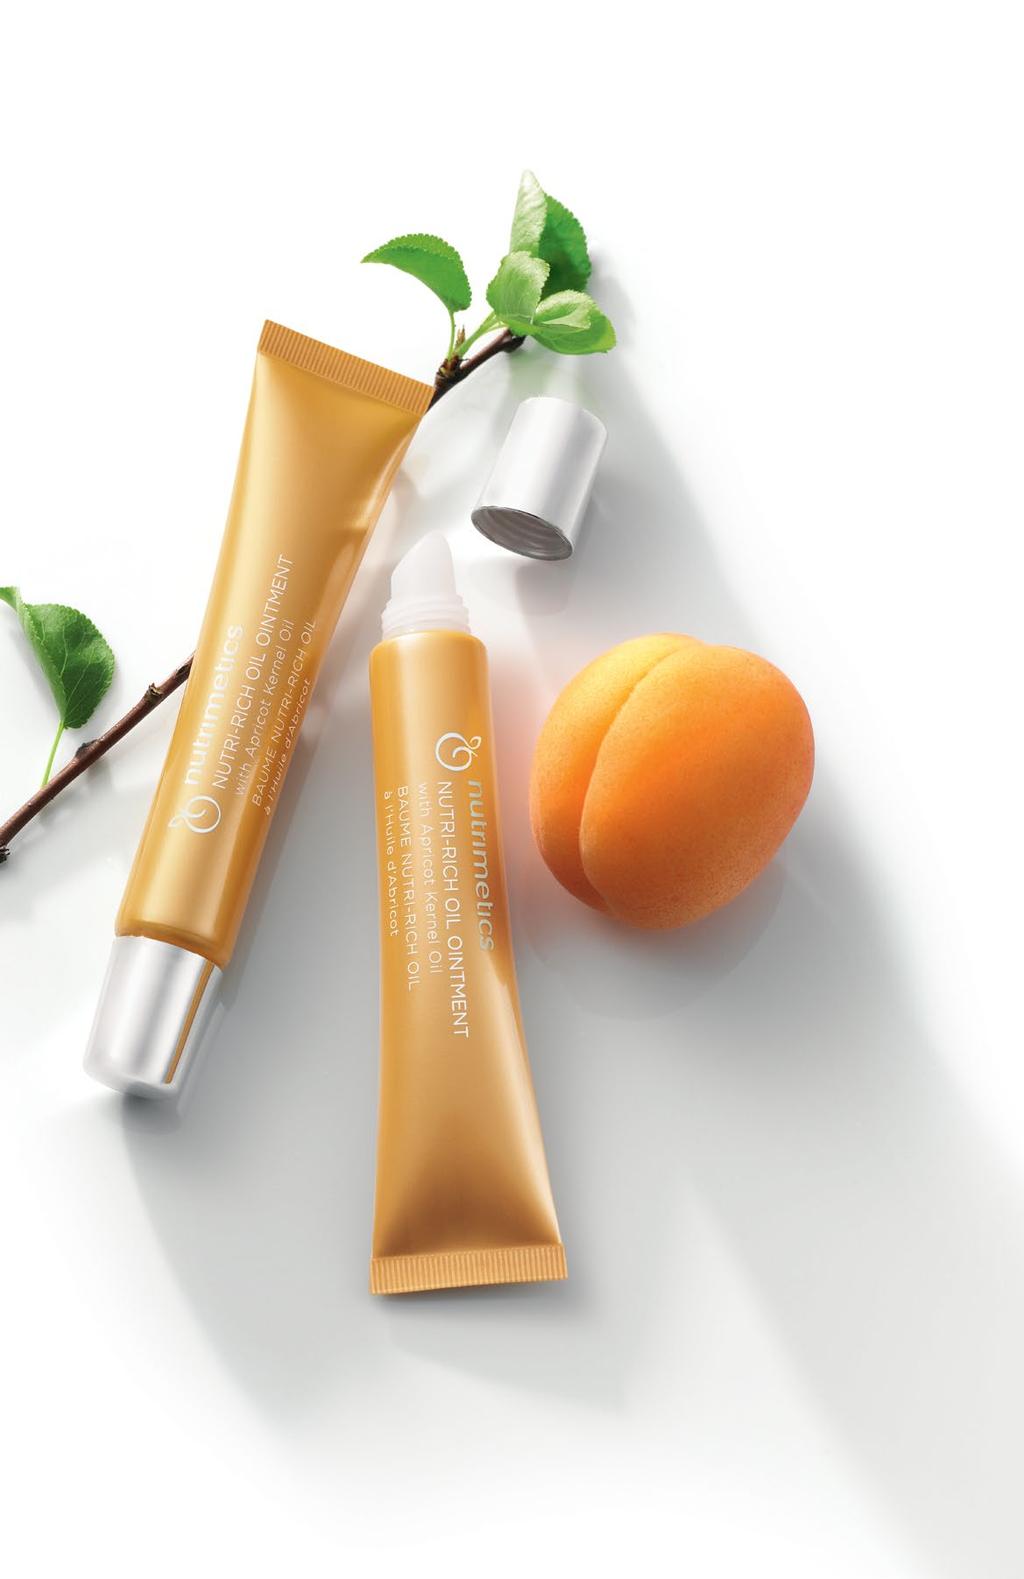 NEW For 49 years, the magic of Apricot Kernel Oil has been passed down for generations. Now the iconic product at the heart of Nutrimetics heritage comes in a handbag-ready Ointment.